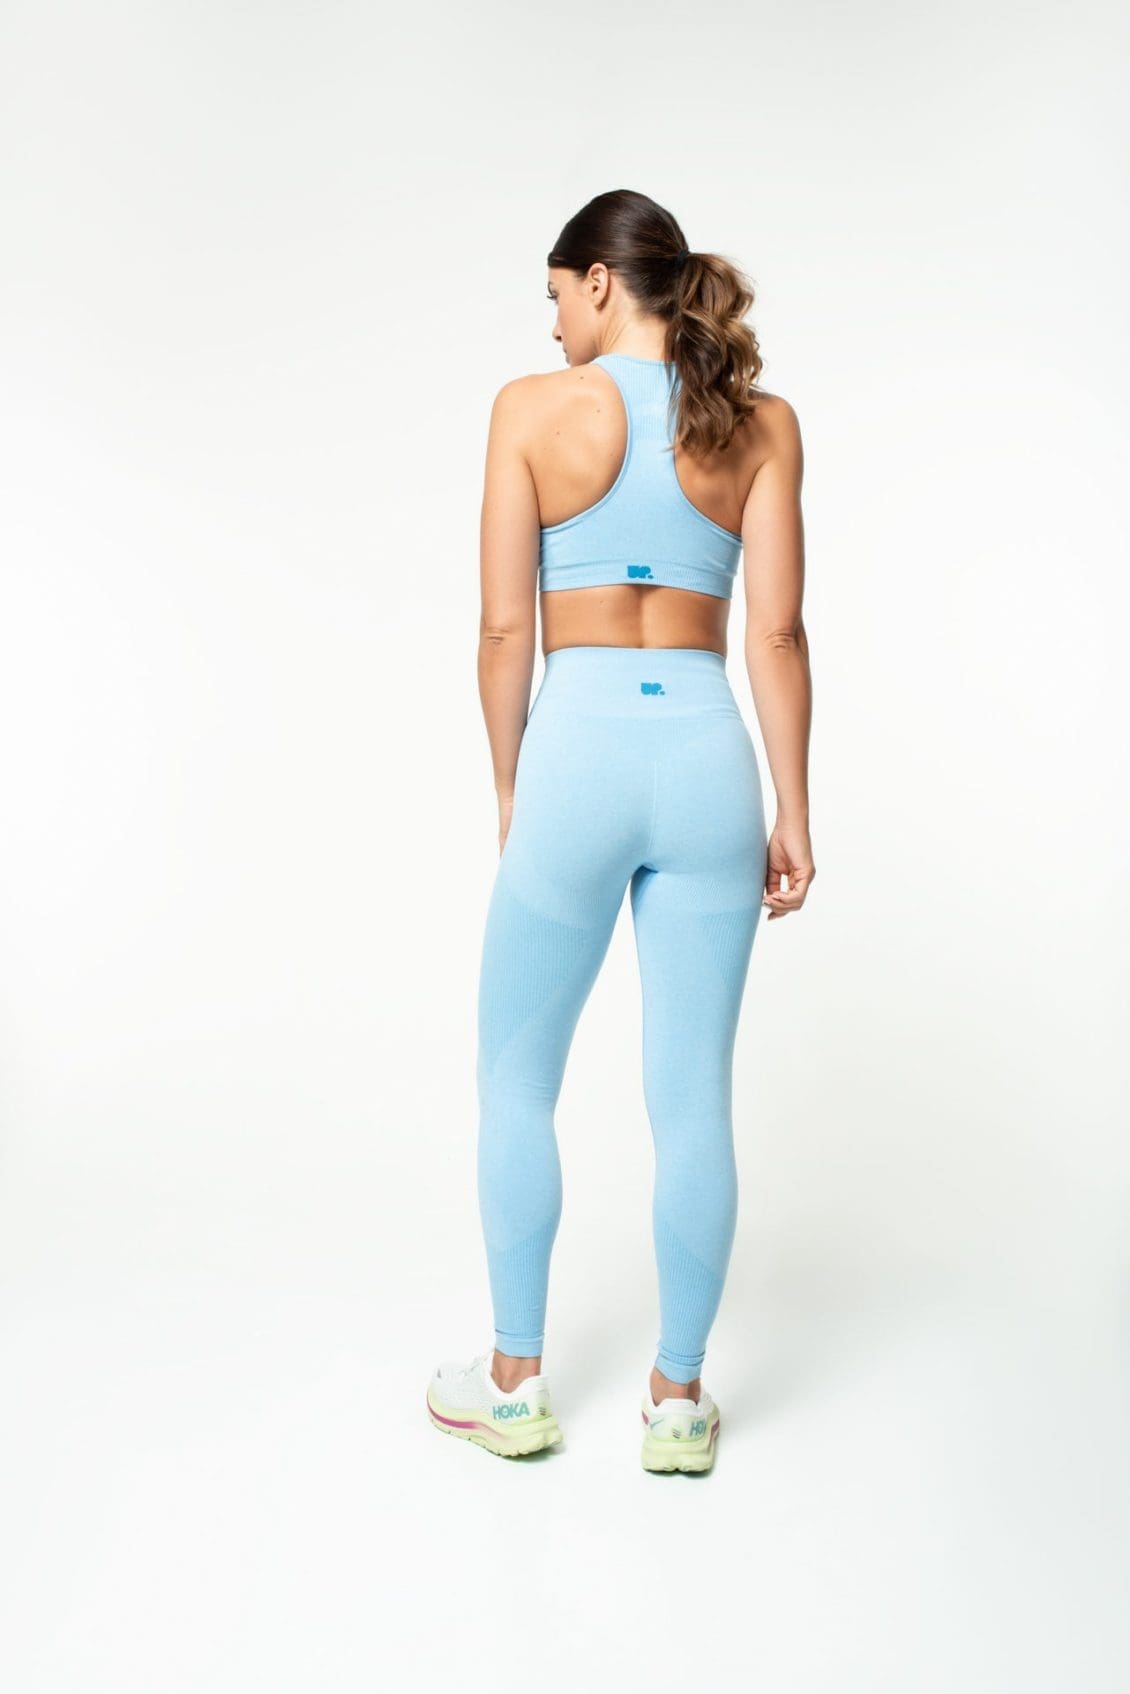 Exceptionally Stylish Gym Shark Leggings at Low Prices 